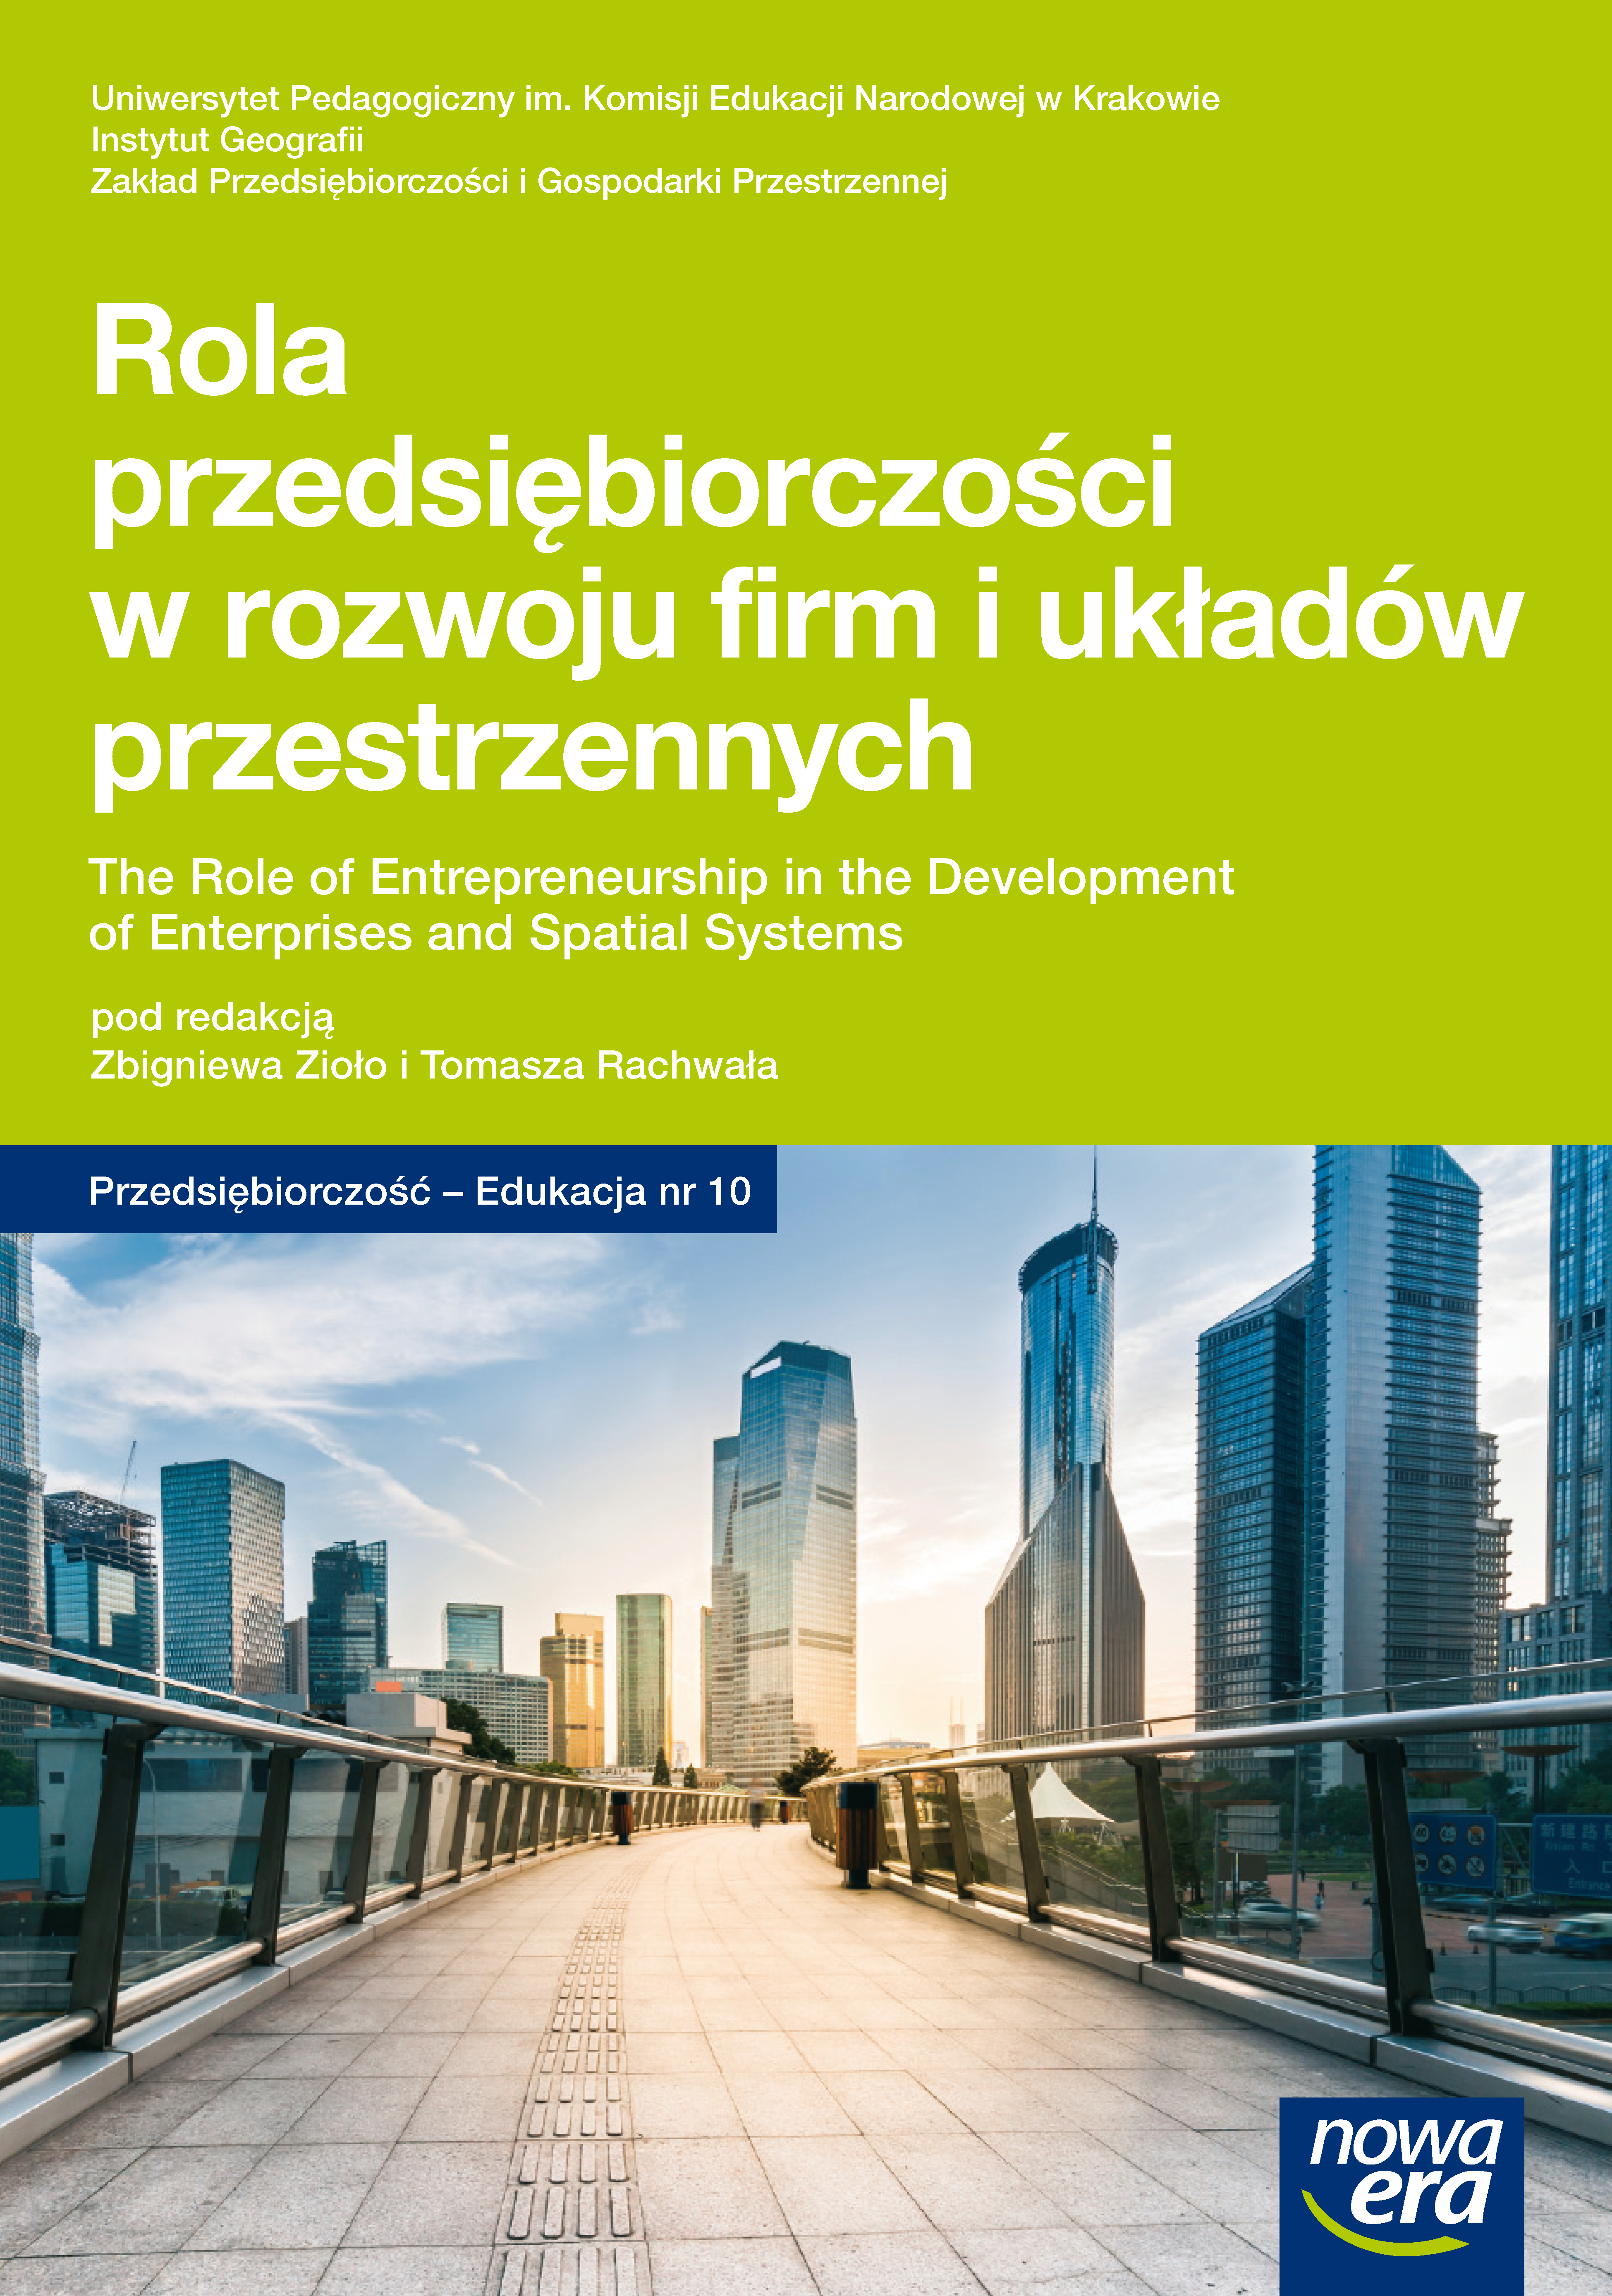 					View Vol. 10 (2014): The role of entrepreneurship in the development of enterprises and spatial systems
				